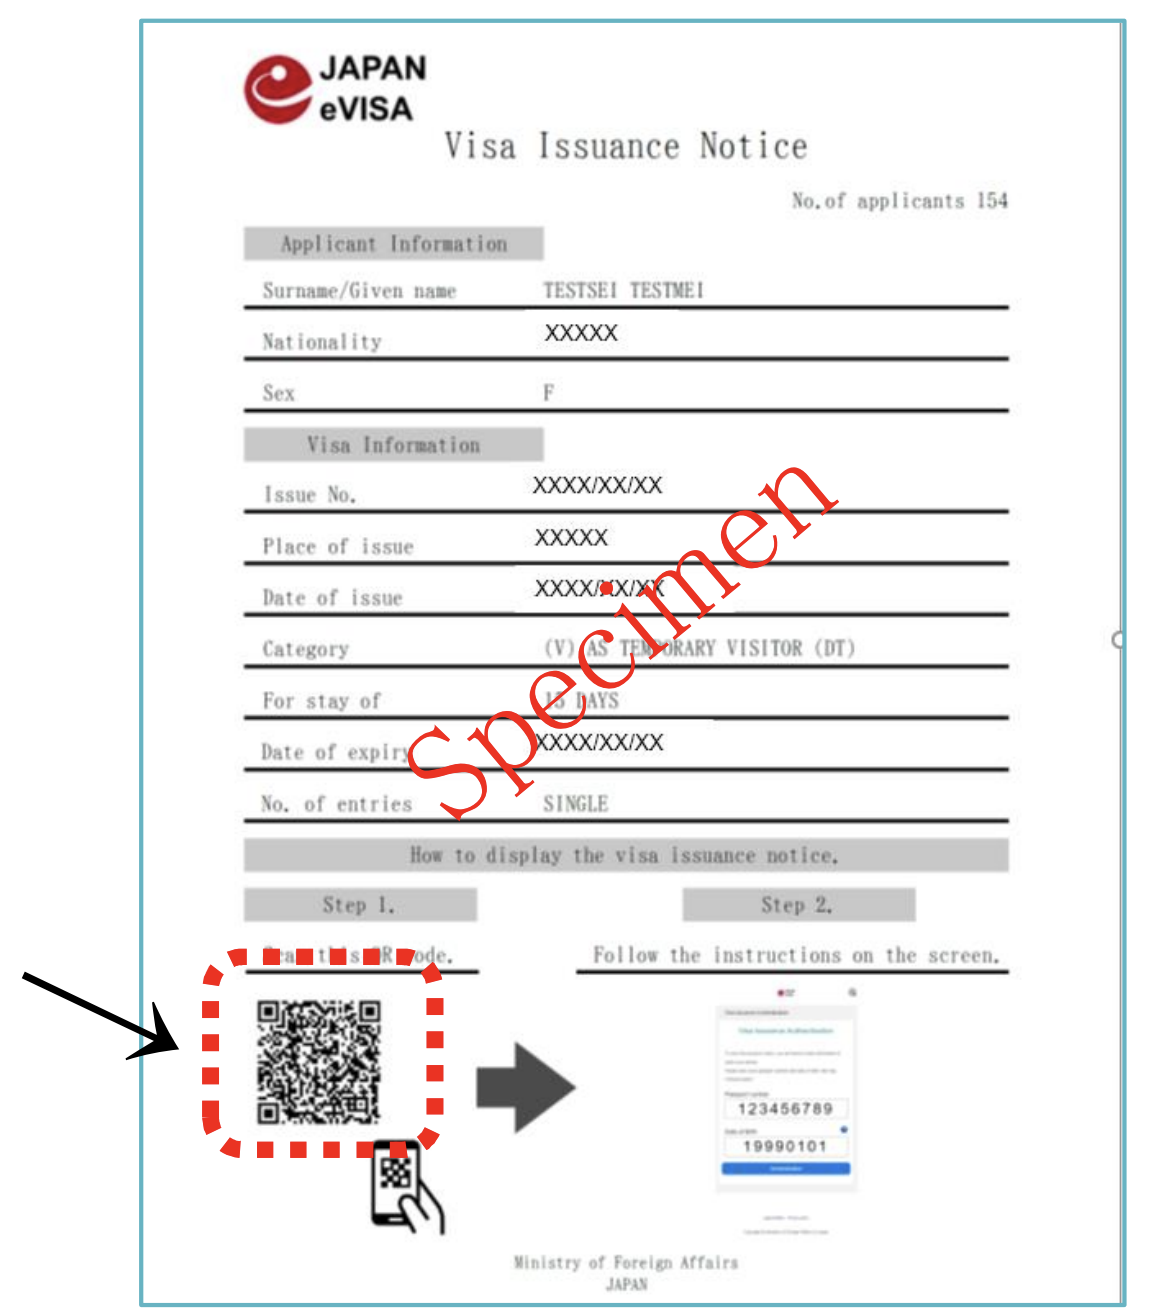 <p>1. Scan the two dimensional barcode printed on the “Visa Issuance Notice” (pdf). Please note that the two dimensional barcode will be given individually.</p>